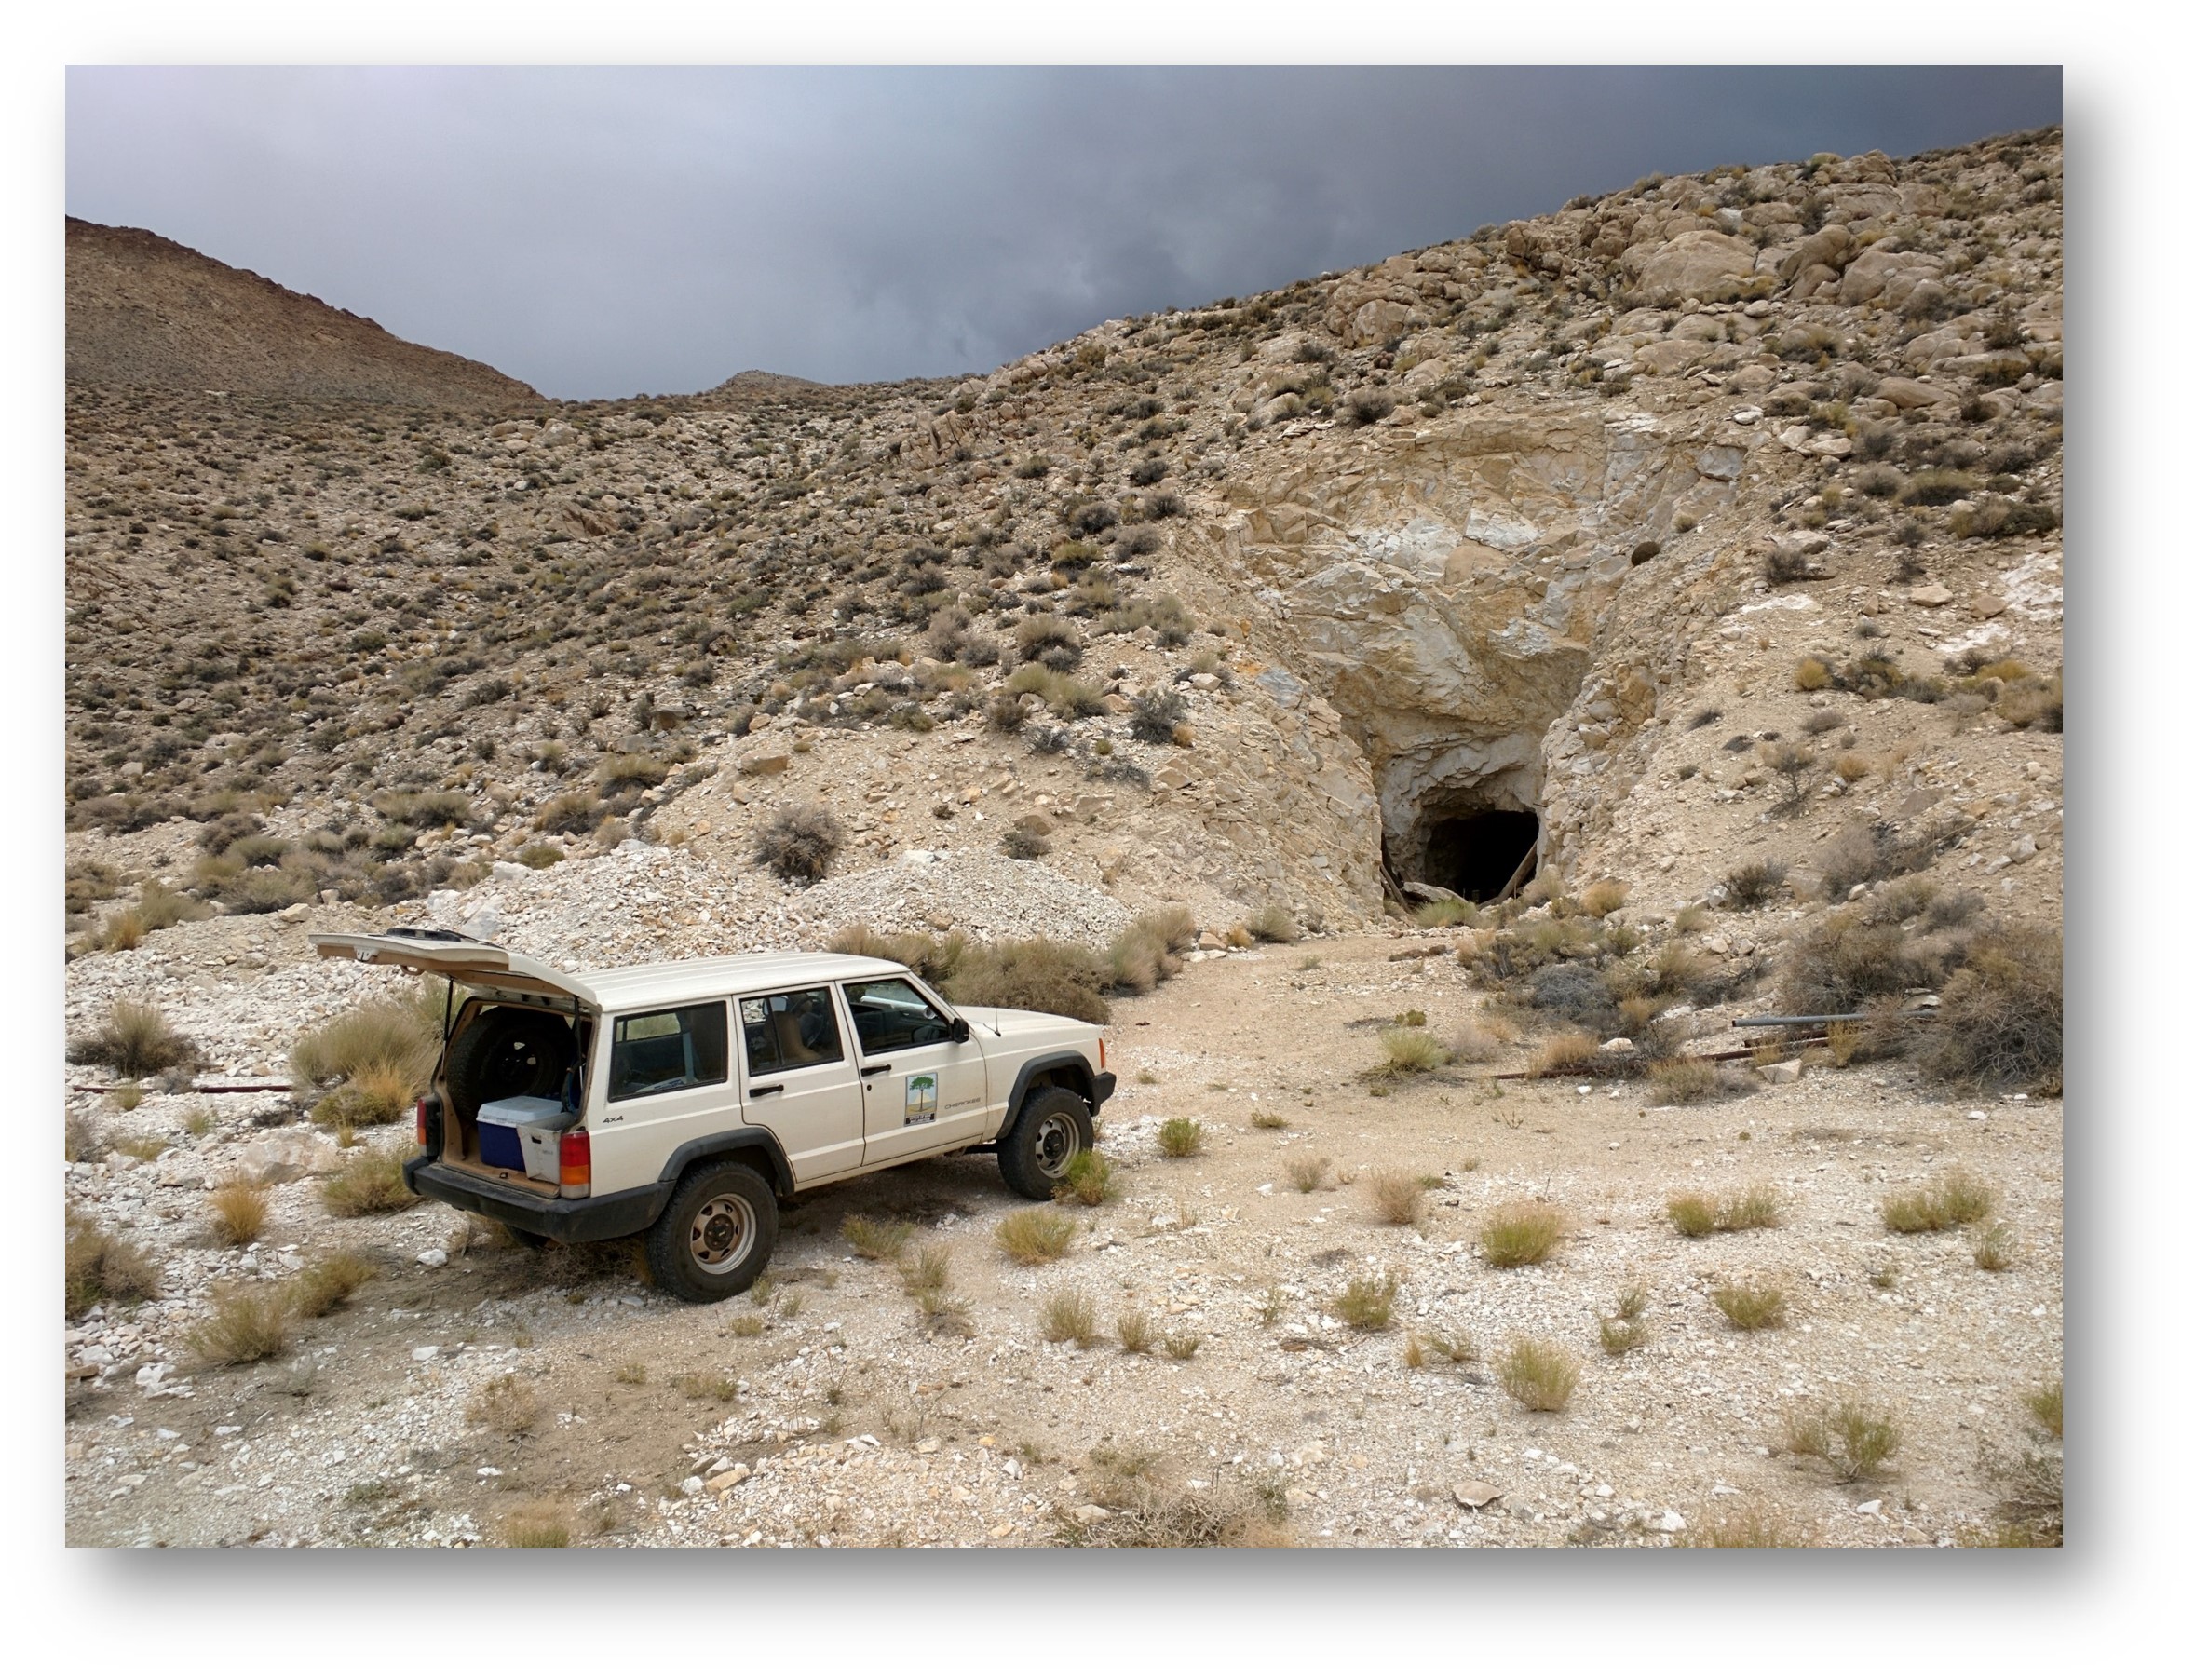 Desert landscape with Division of Mine Resources vehicle  parked outside entrance of an abandoned mine